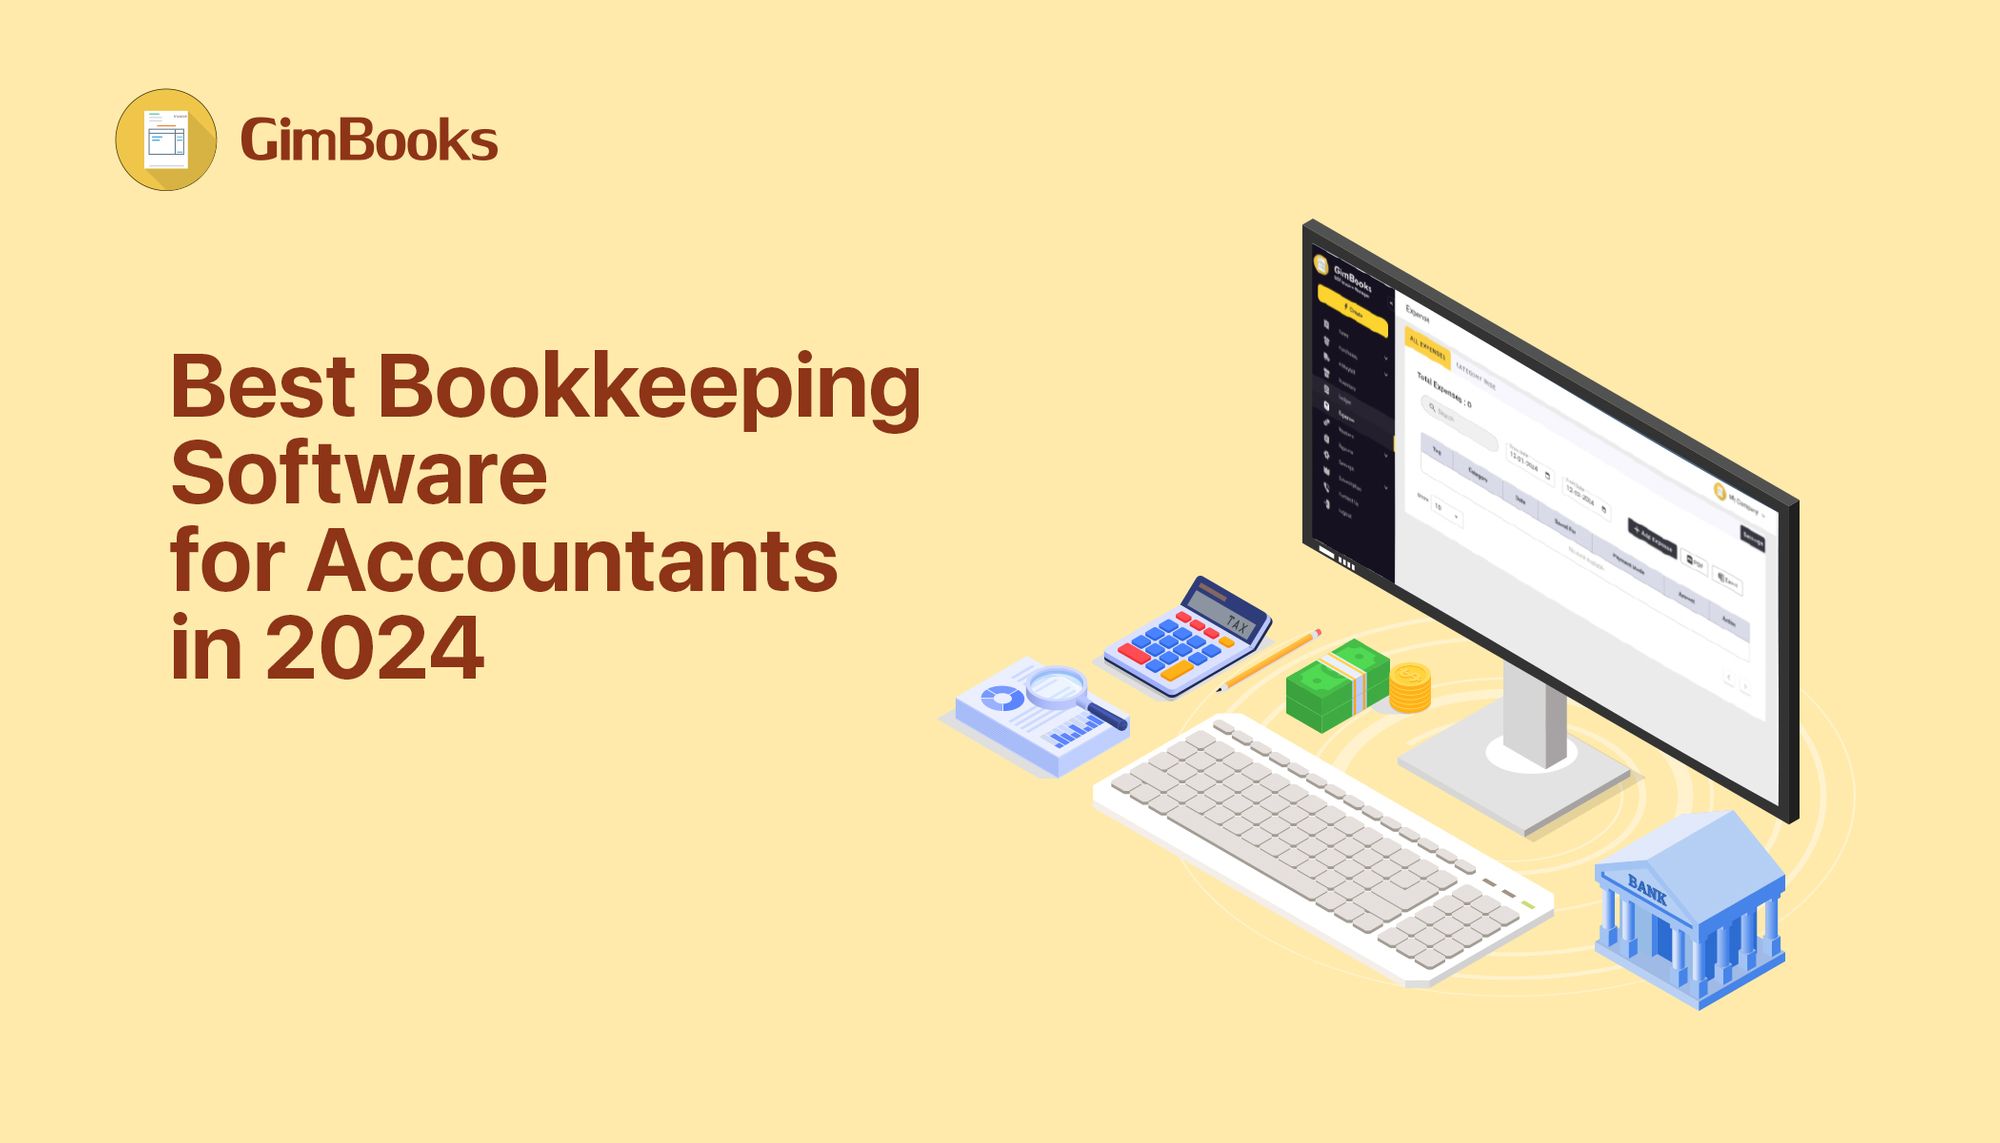 Best Bookkeeping Software for Accountants in 2024